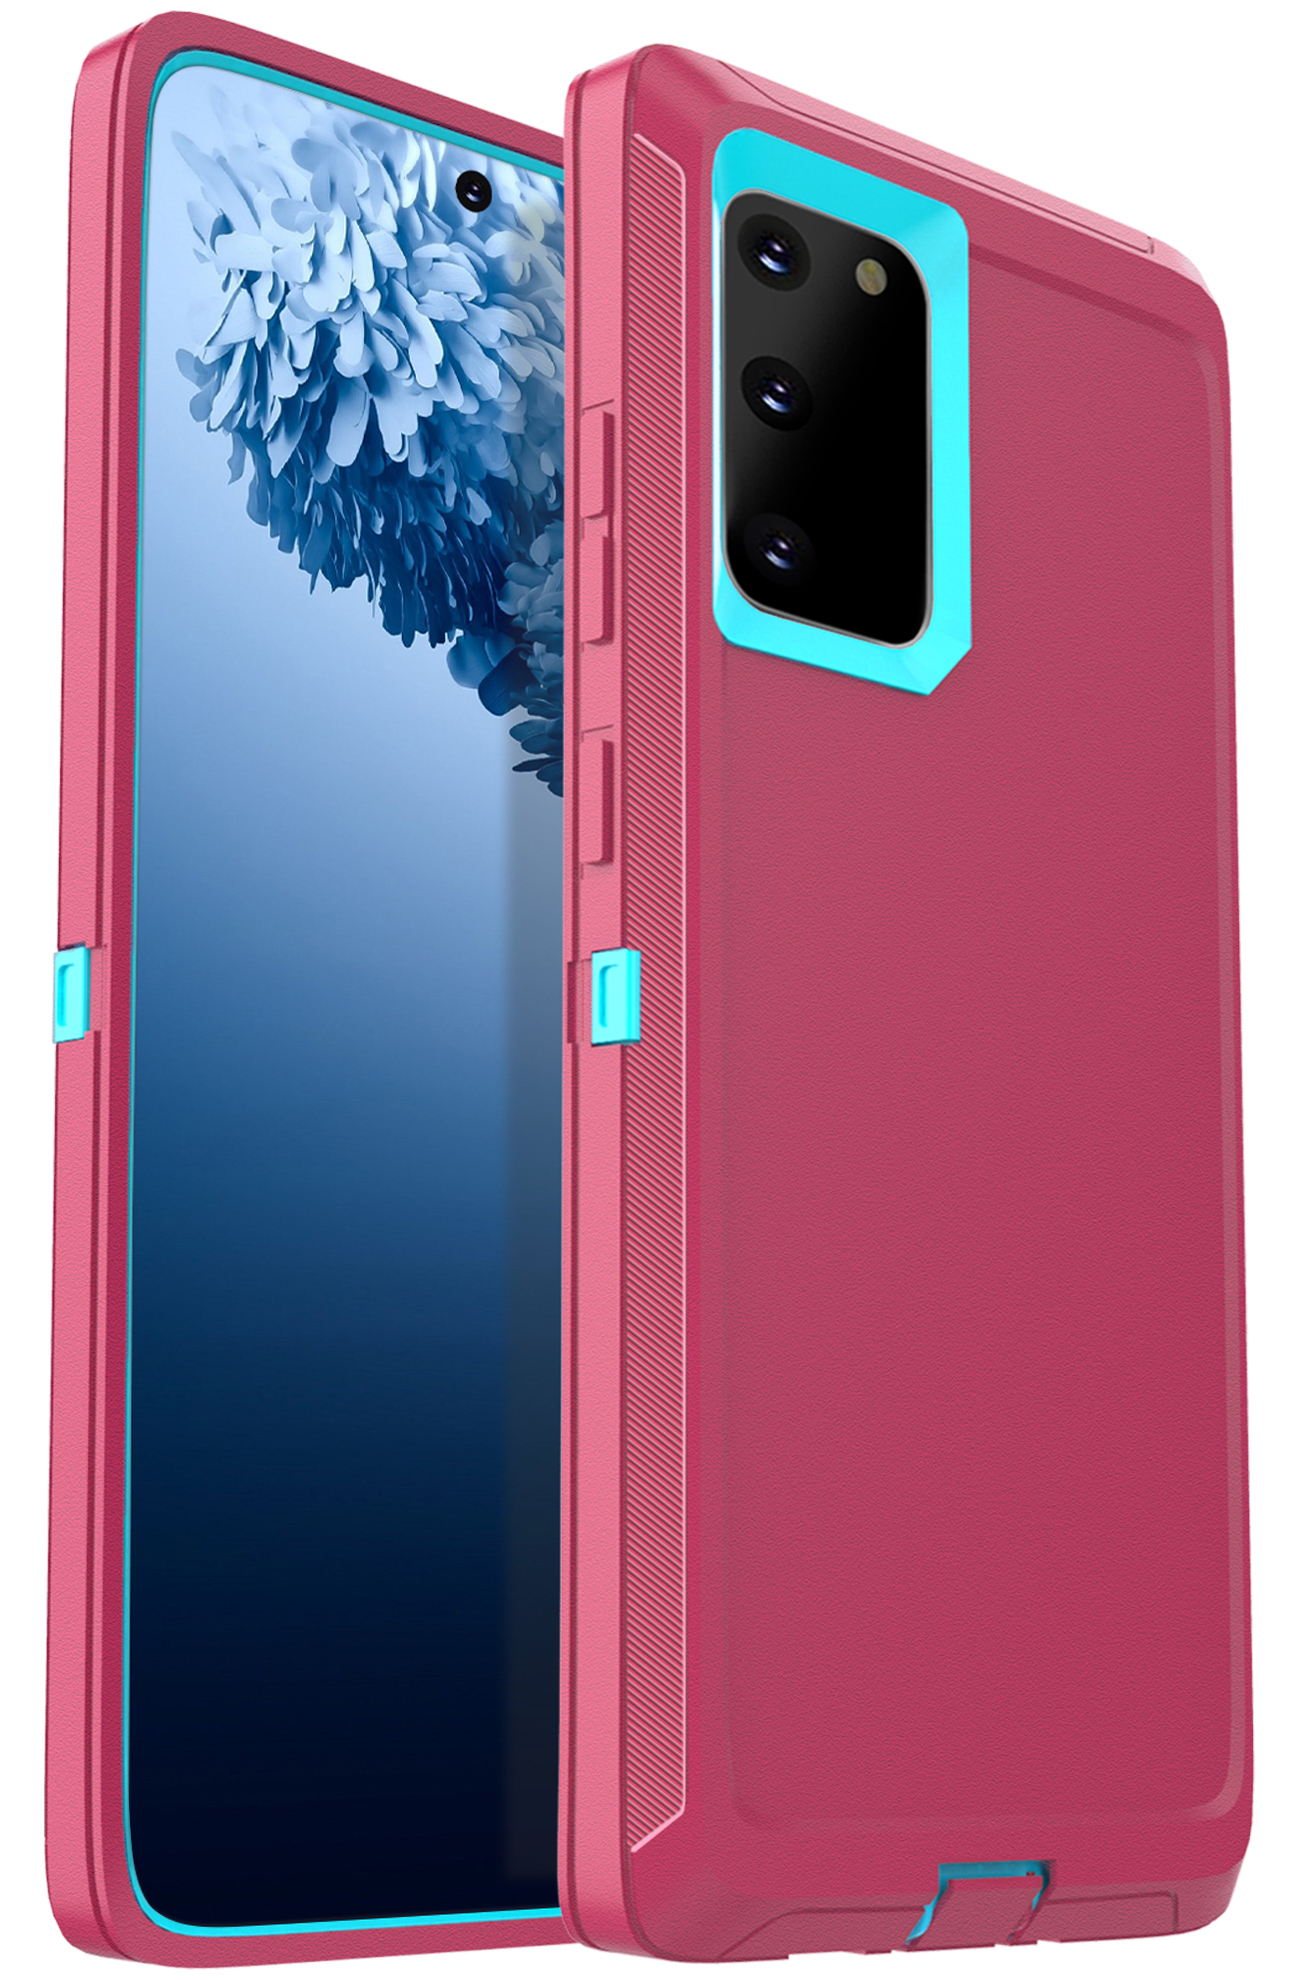 FOGEEK Compatible with Samsung Galaxy S20 5G Case, Heavy Duty Rugged Case, Protective Cover (Shockproof)(Drop Proof) Case for Galaxy S20 5G (6.2 inch) 2020 (Rose/Blue)